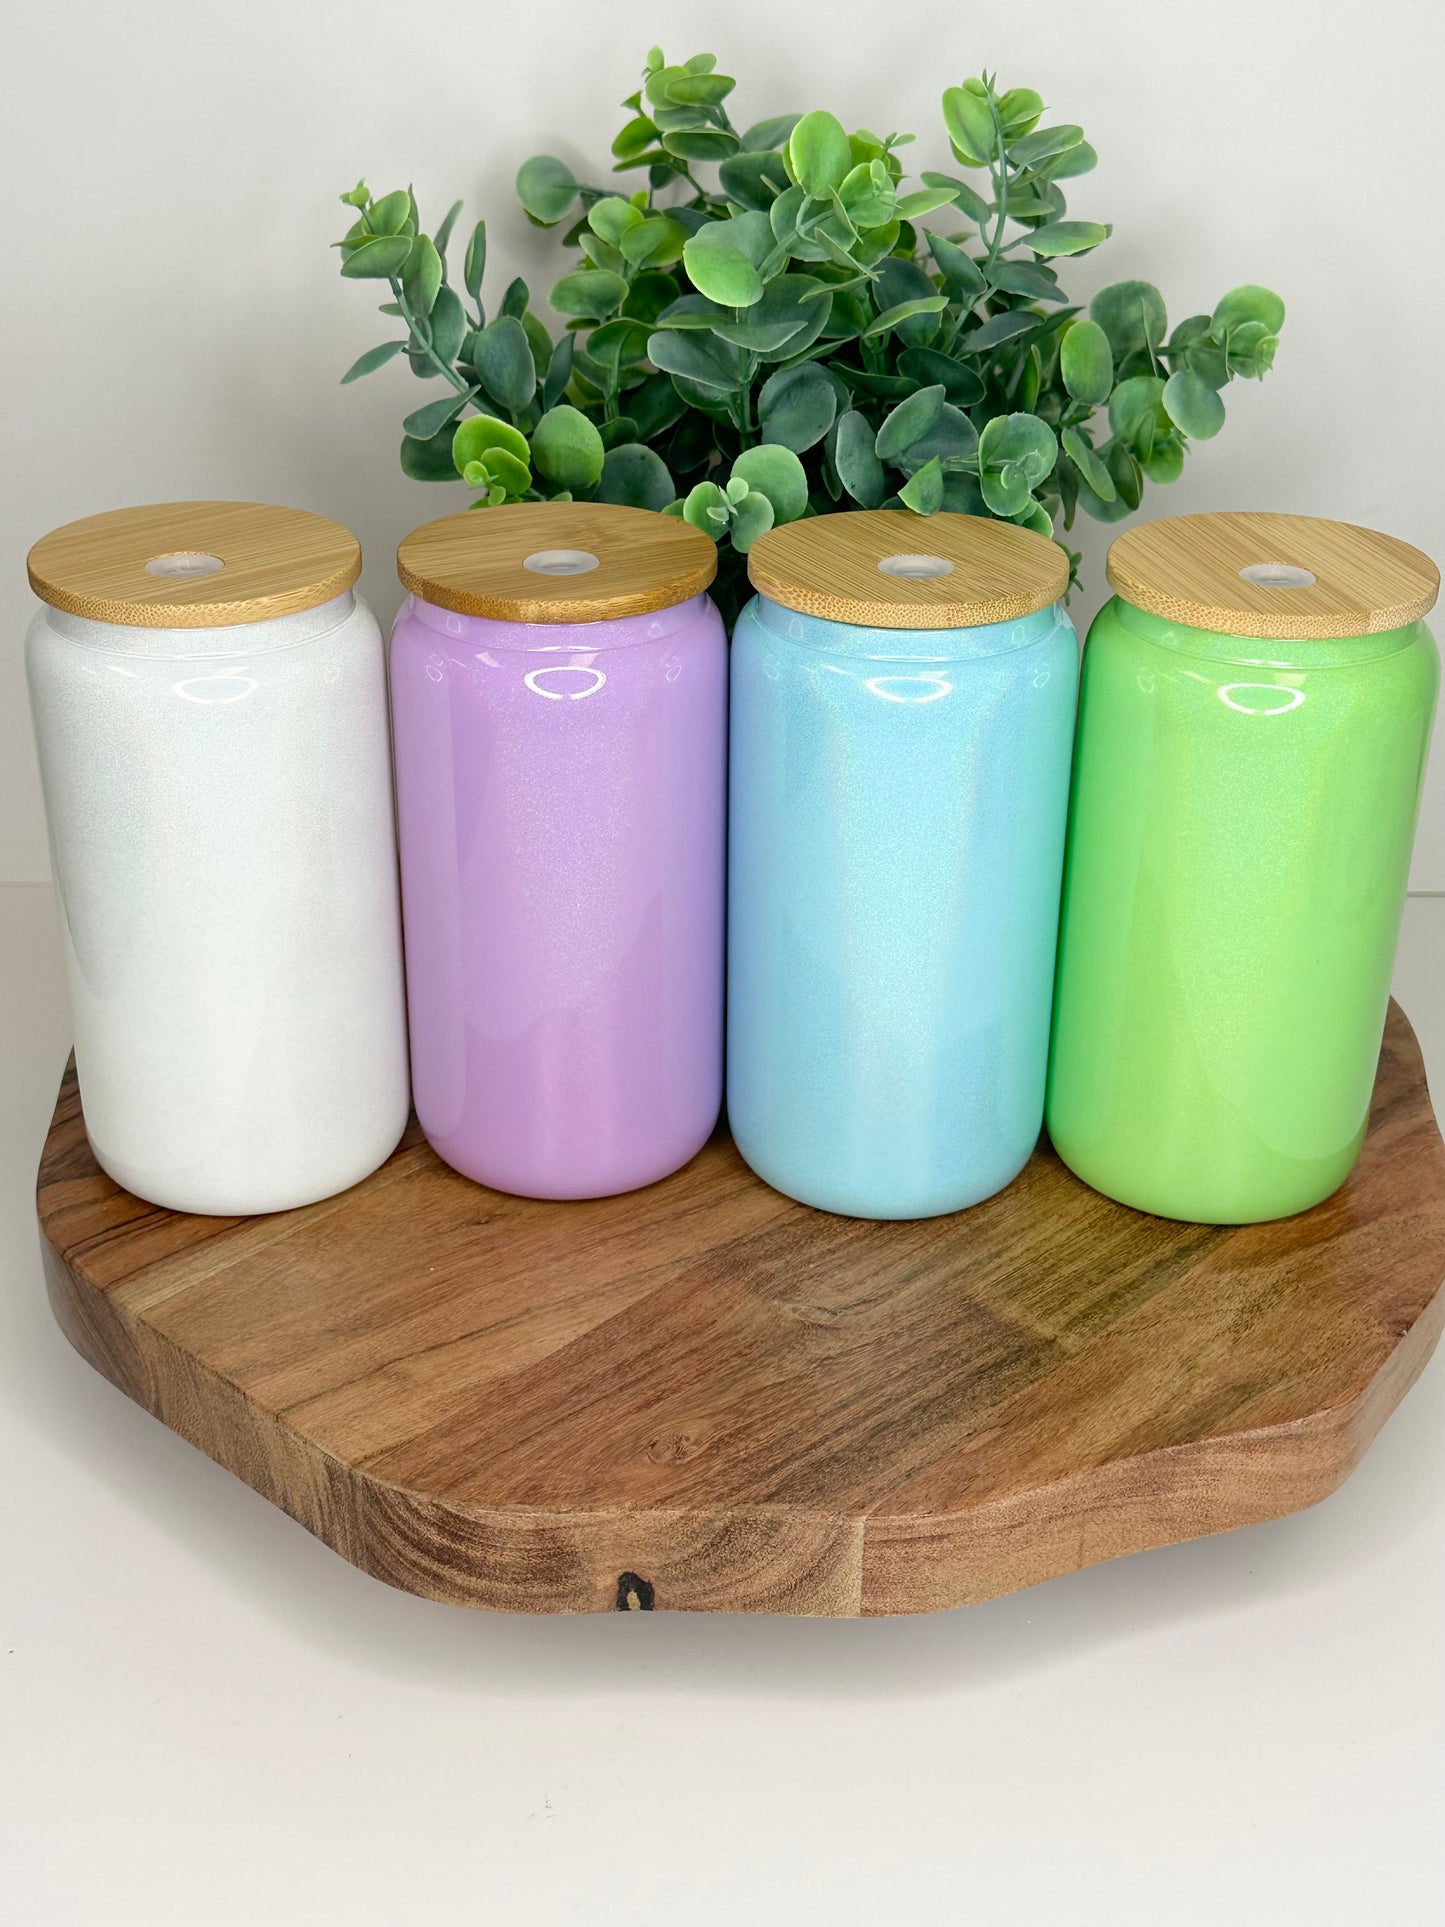 Sublimation Iridescent Glass Cans| Beer Cans with Bamboo Lid 16 oz